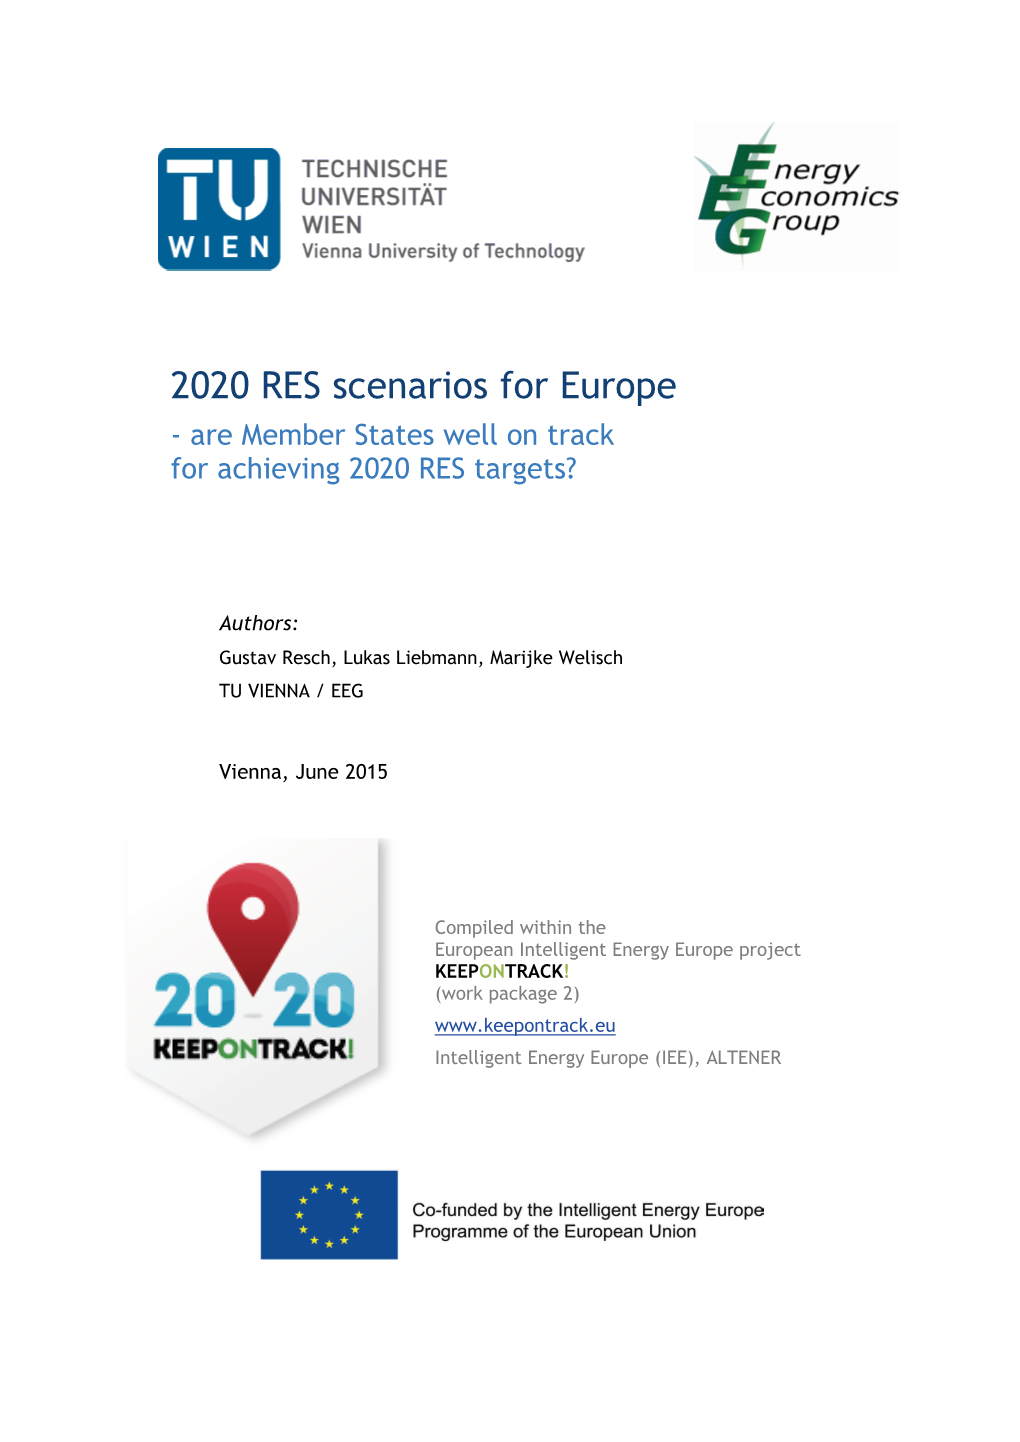 2020 RES Scenarios for Europe - Are Member States Well on Track for Achieving 2020 RES Targets?